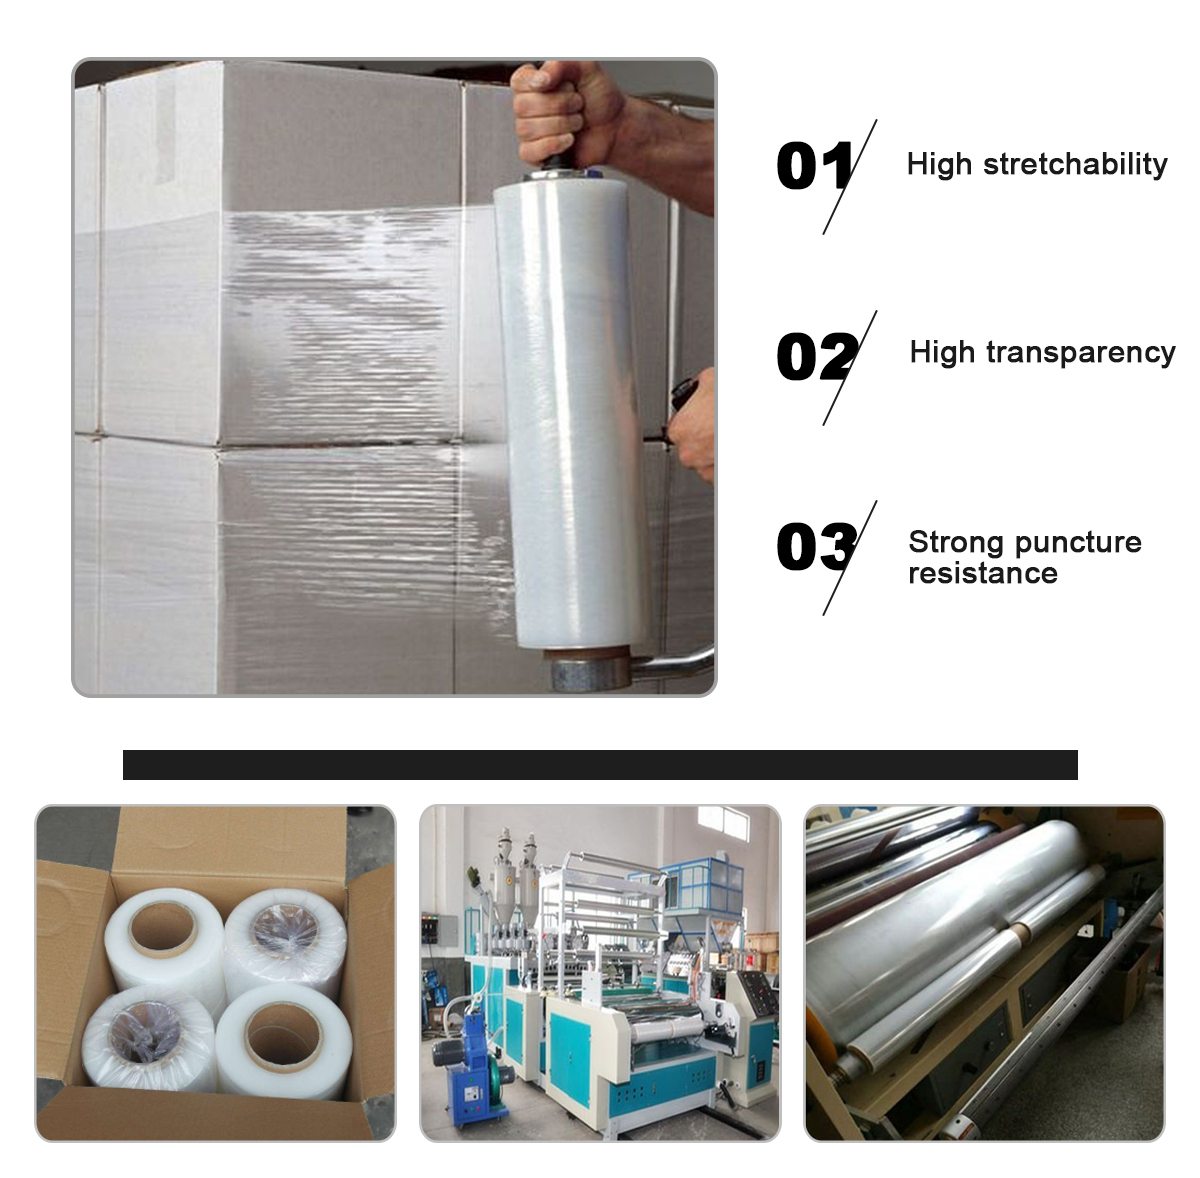 lldpe film/lldpe stretch film/stretch film lldpe for product packing